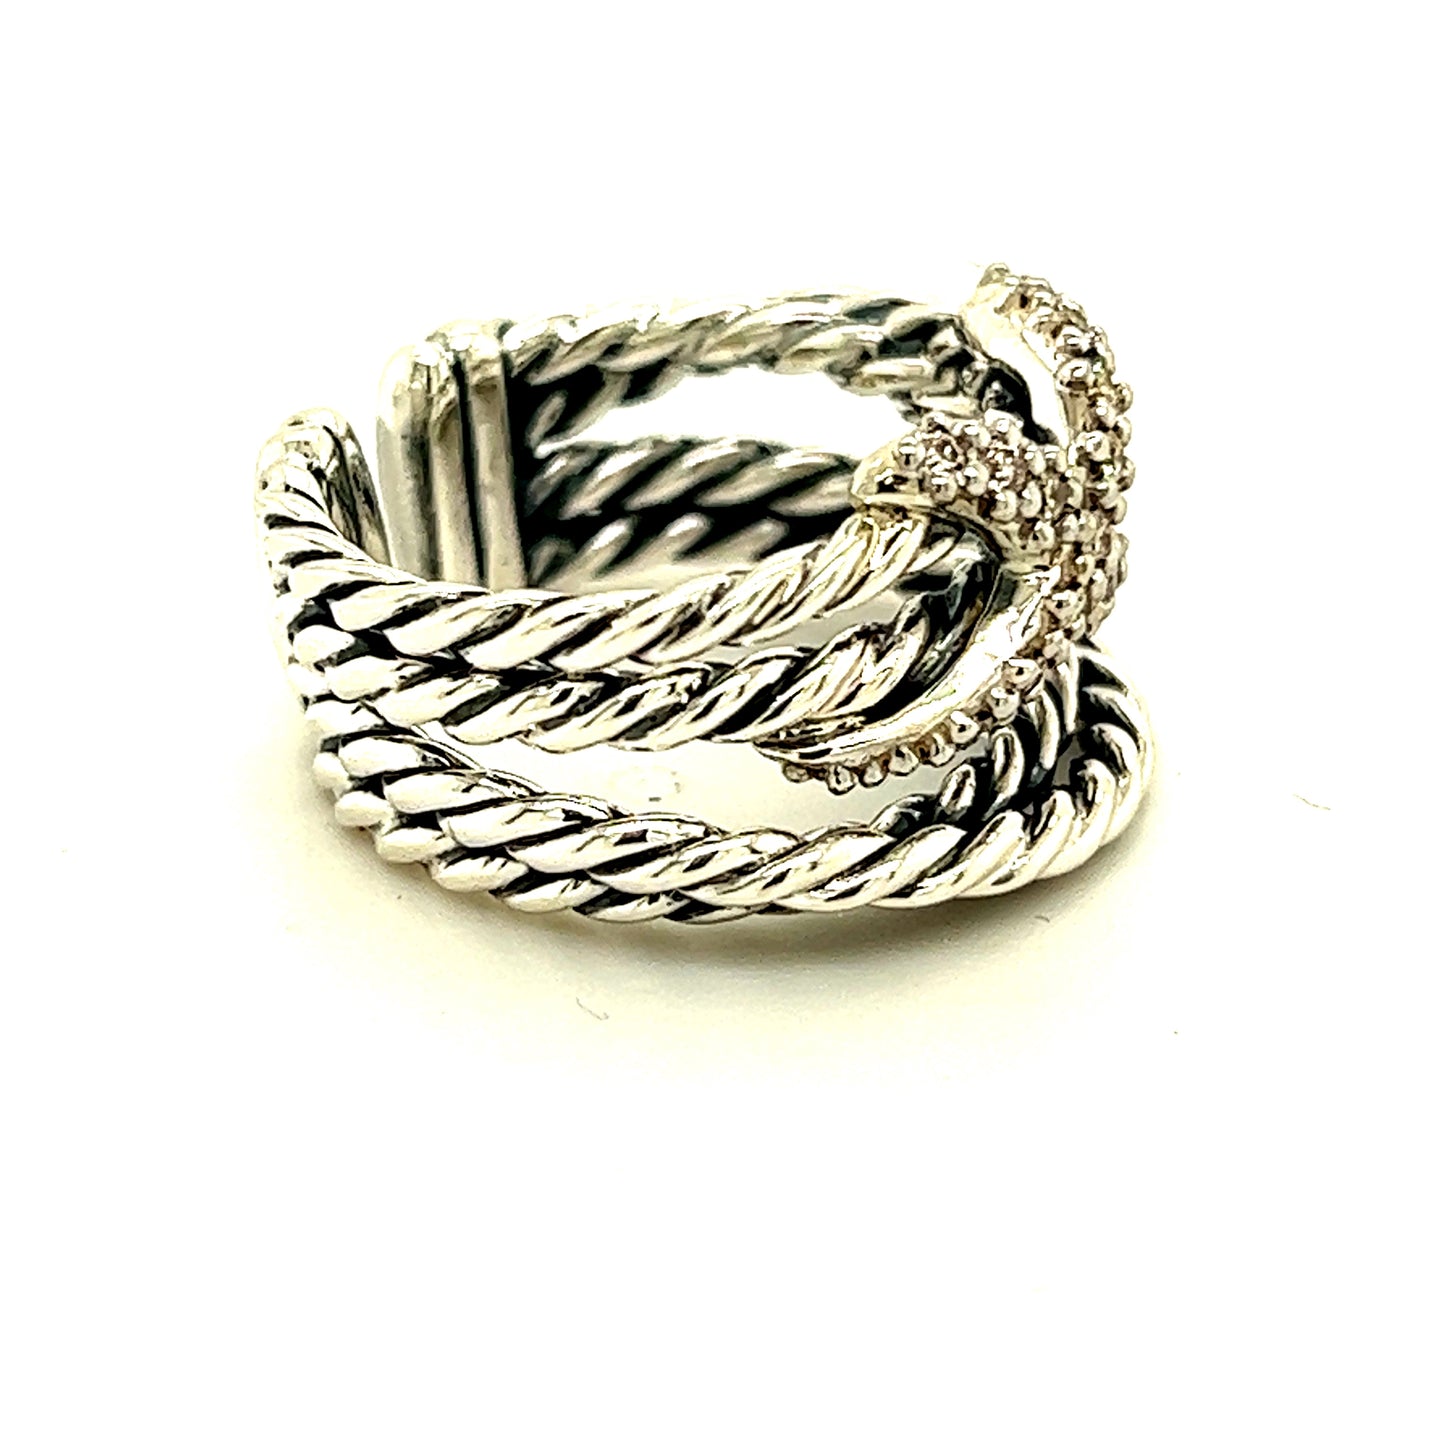 David Yurman Authentic Estate Expandable X Crossover Diamond Ring 6 Silver 0.15 Cts 14 mm DY227